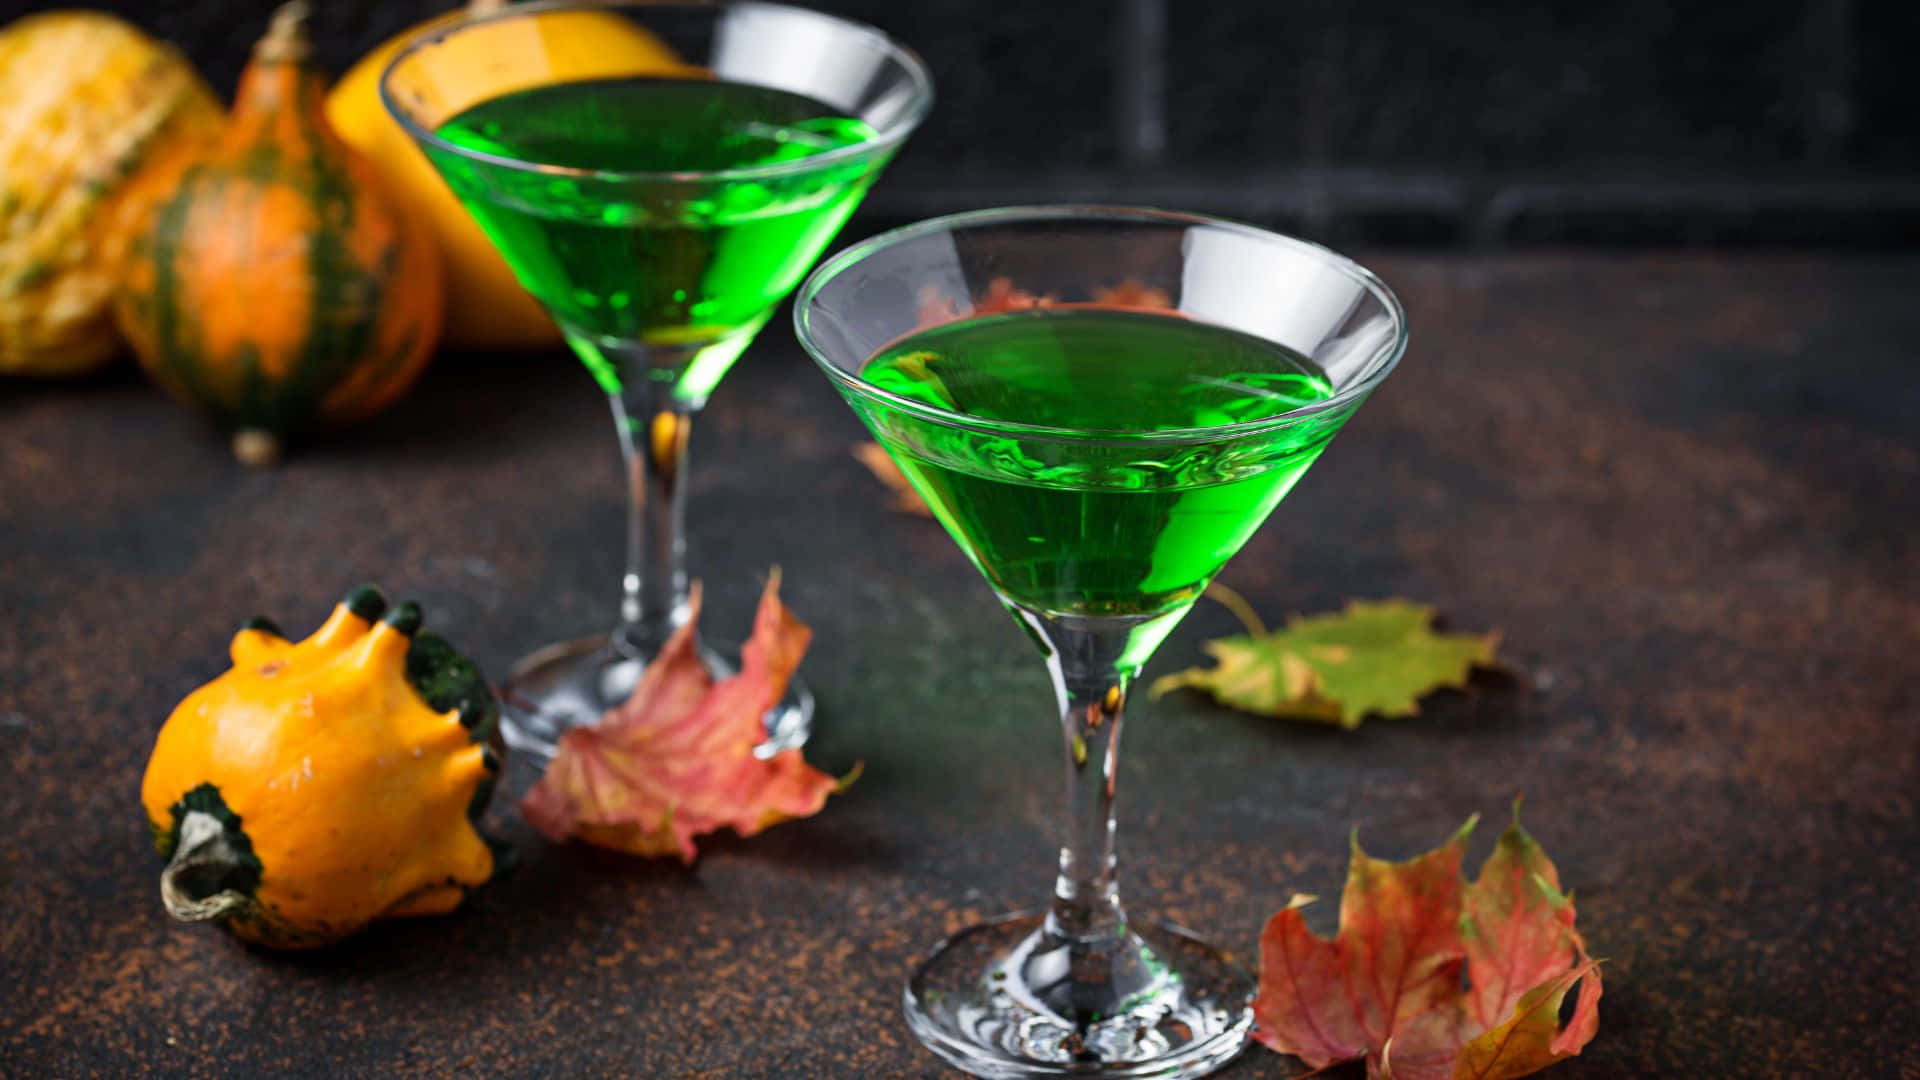 Let the Spirit of Halloween flow with Spooky Cocktails! Wallpaper